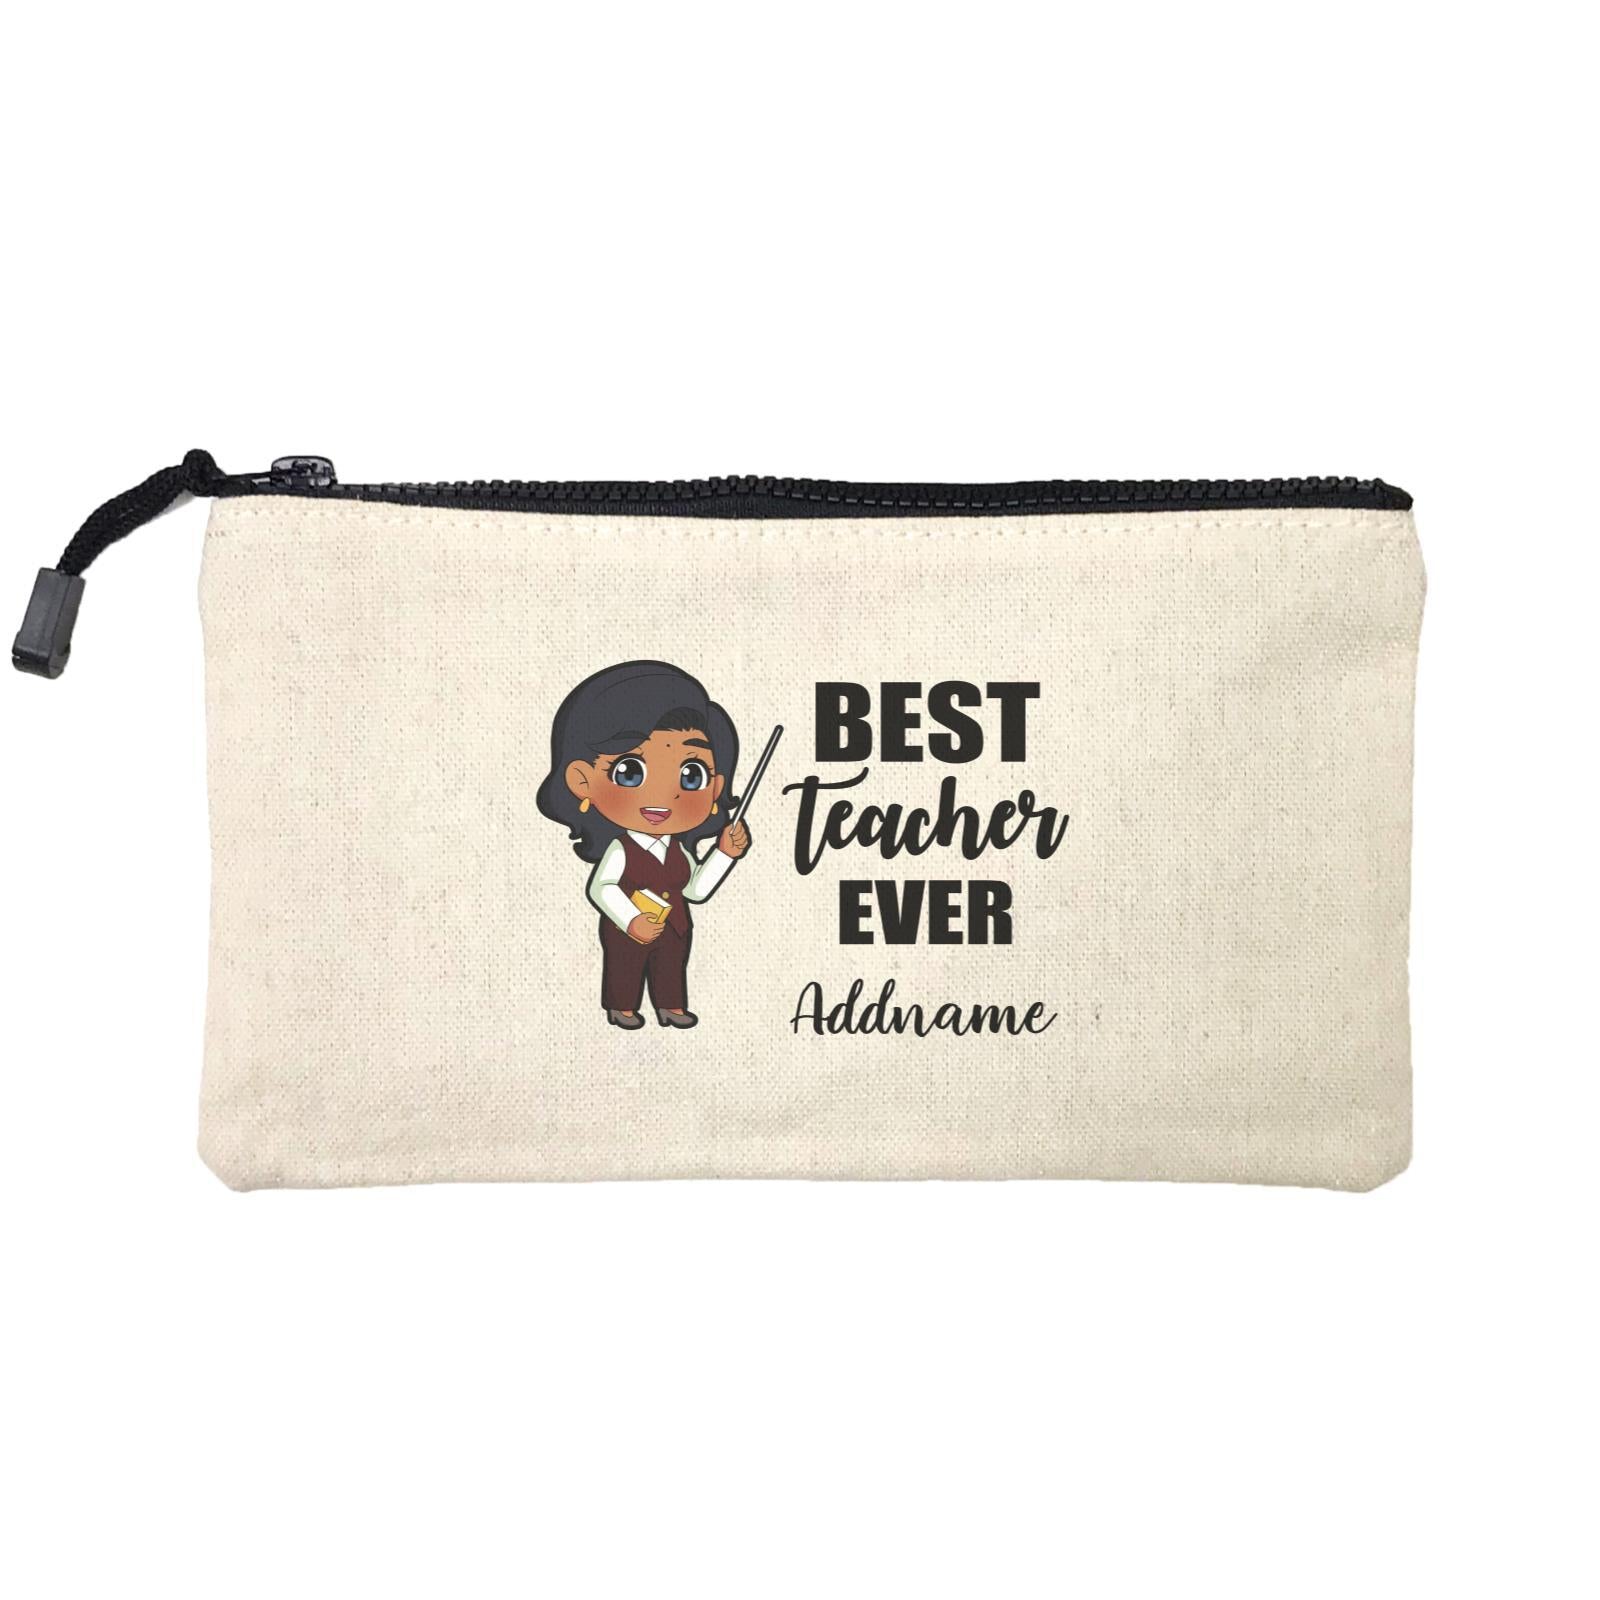 Chibi Teachers Indian Woman Best Teacher Ever Addname Mini Accessories Stationery Pouch